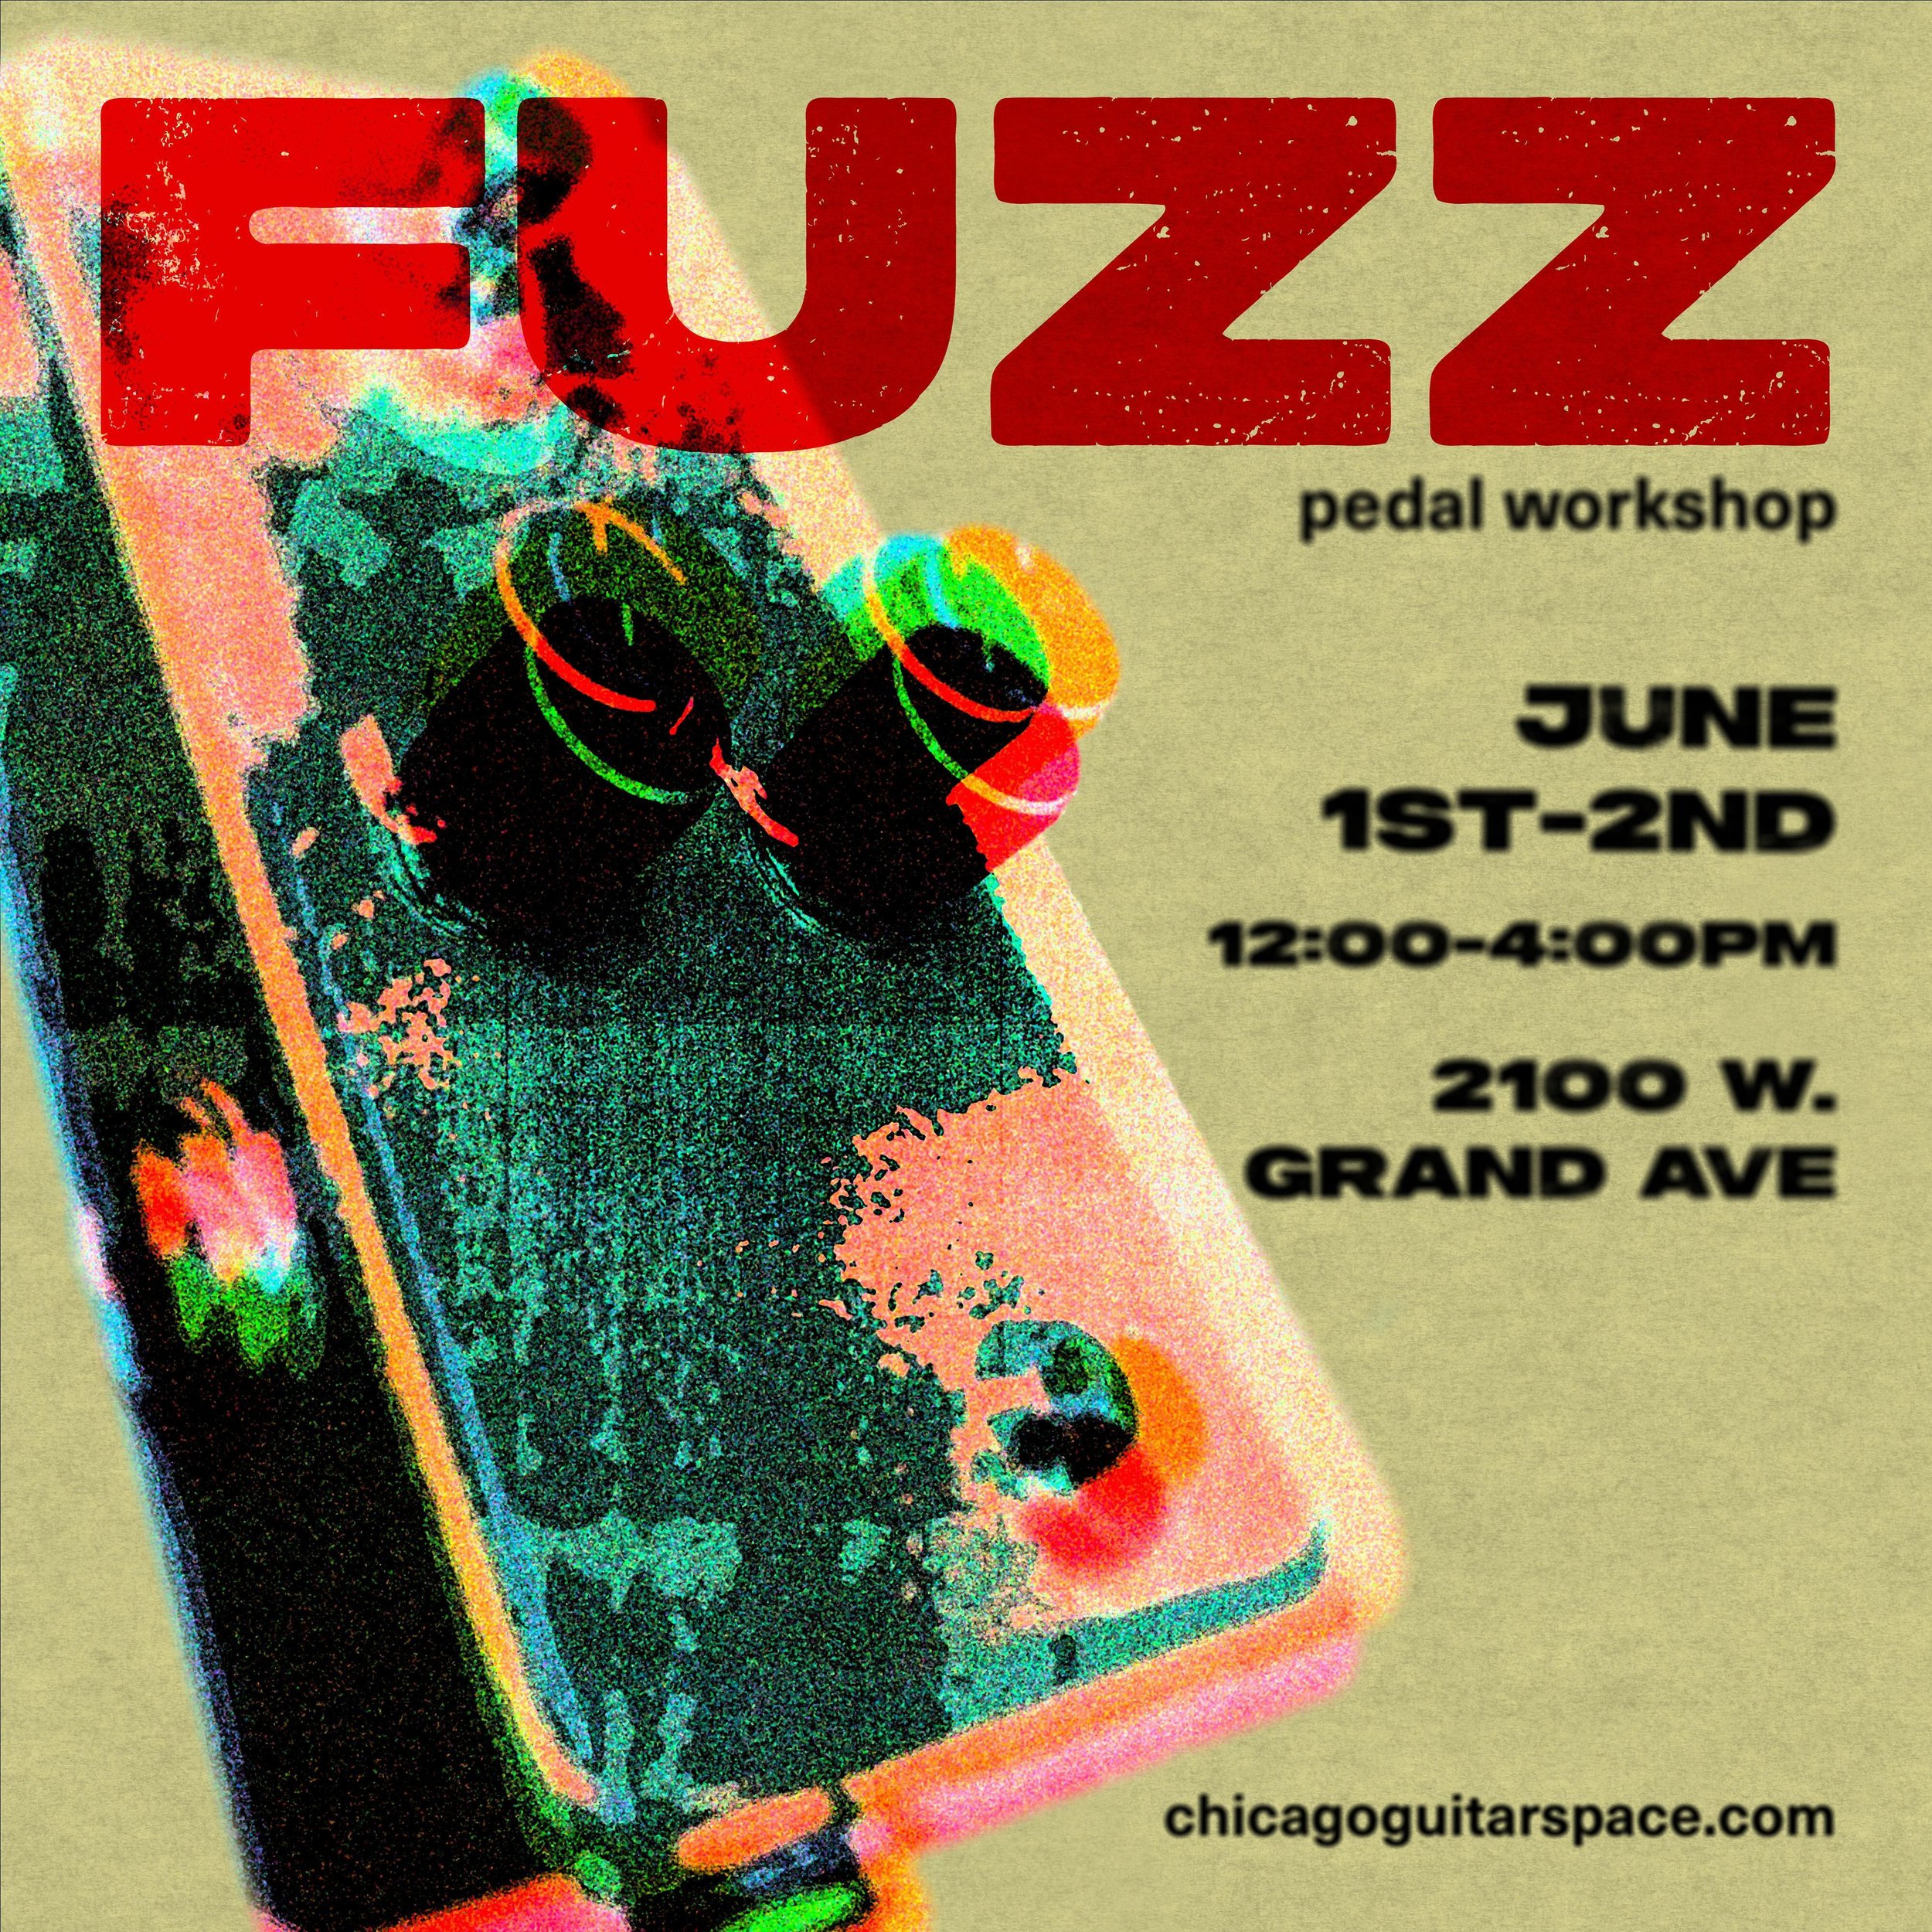 Want to explore a gritty soundscape in your tone? Stop by and build your own Fuzz pedal! 🎸💥🎶
Join us for the next installment of our pedal classes where we&rsquo;ll be navigating the depths of fuzzy, velcro-y, square wave goodness. June 1-2, from 